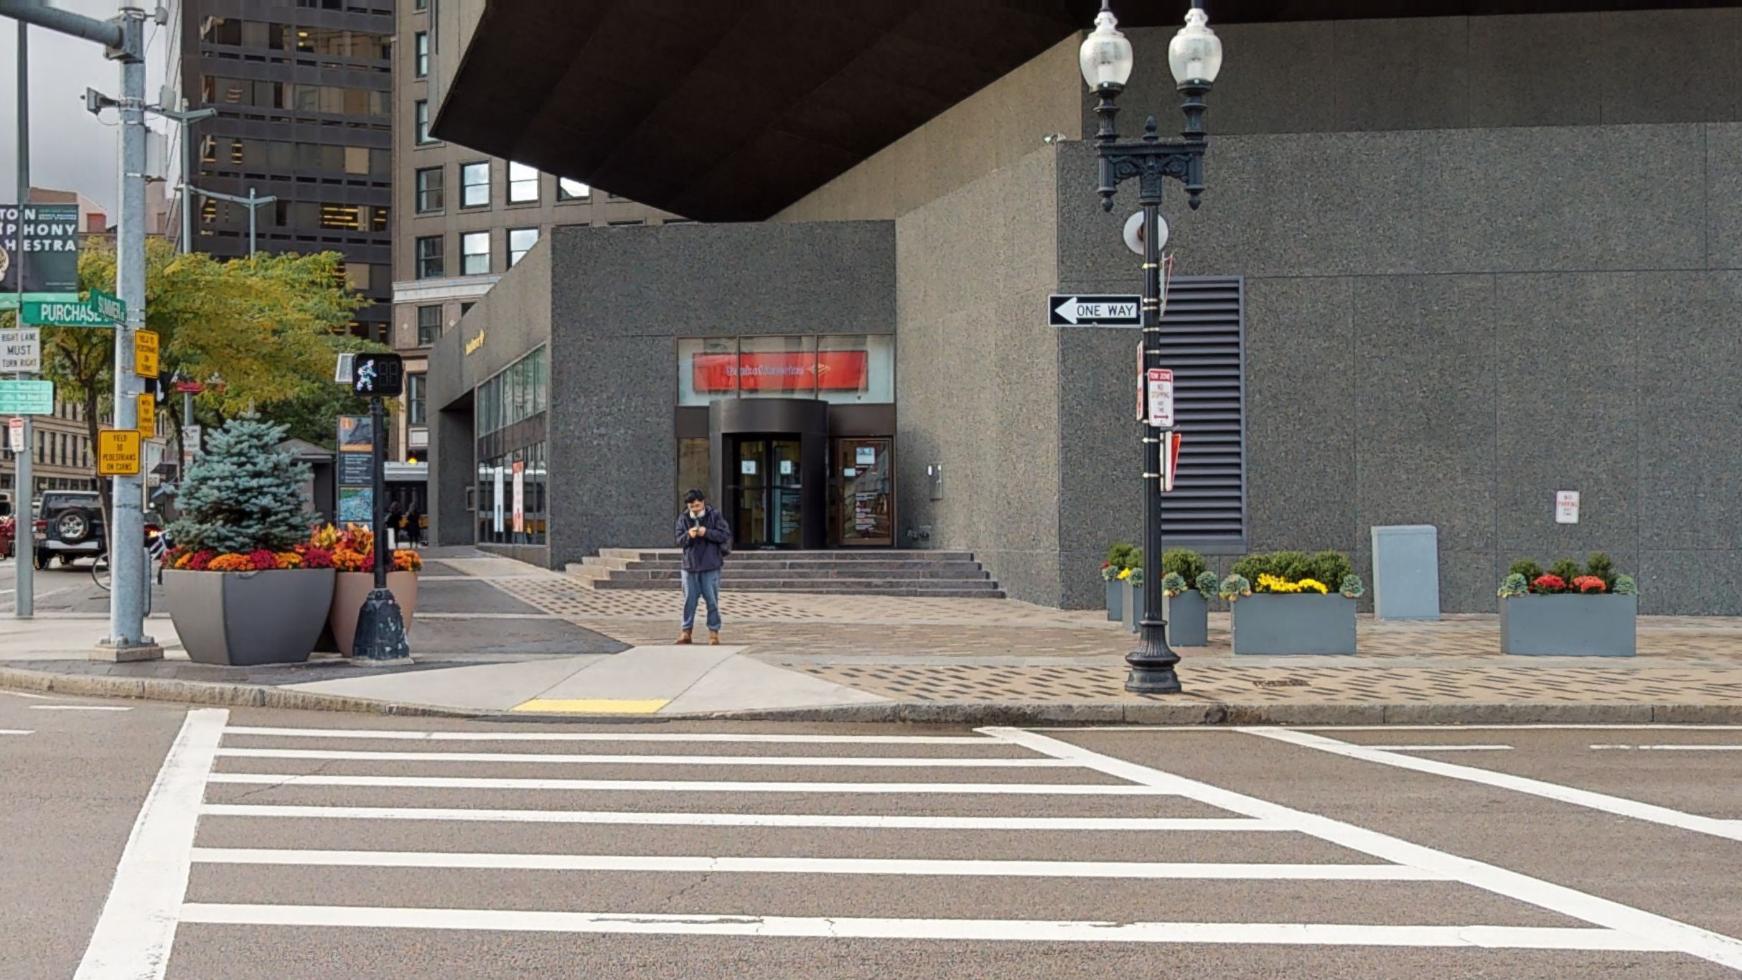 Bank of America financial center with walk-up ATM | 175 Federal St, Boston, MA 02110